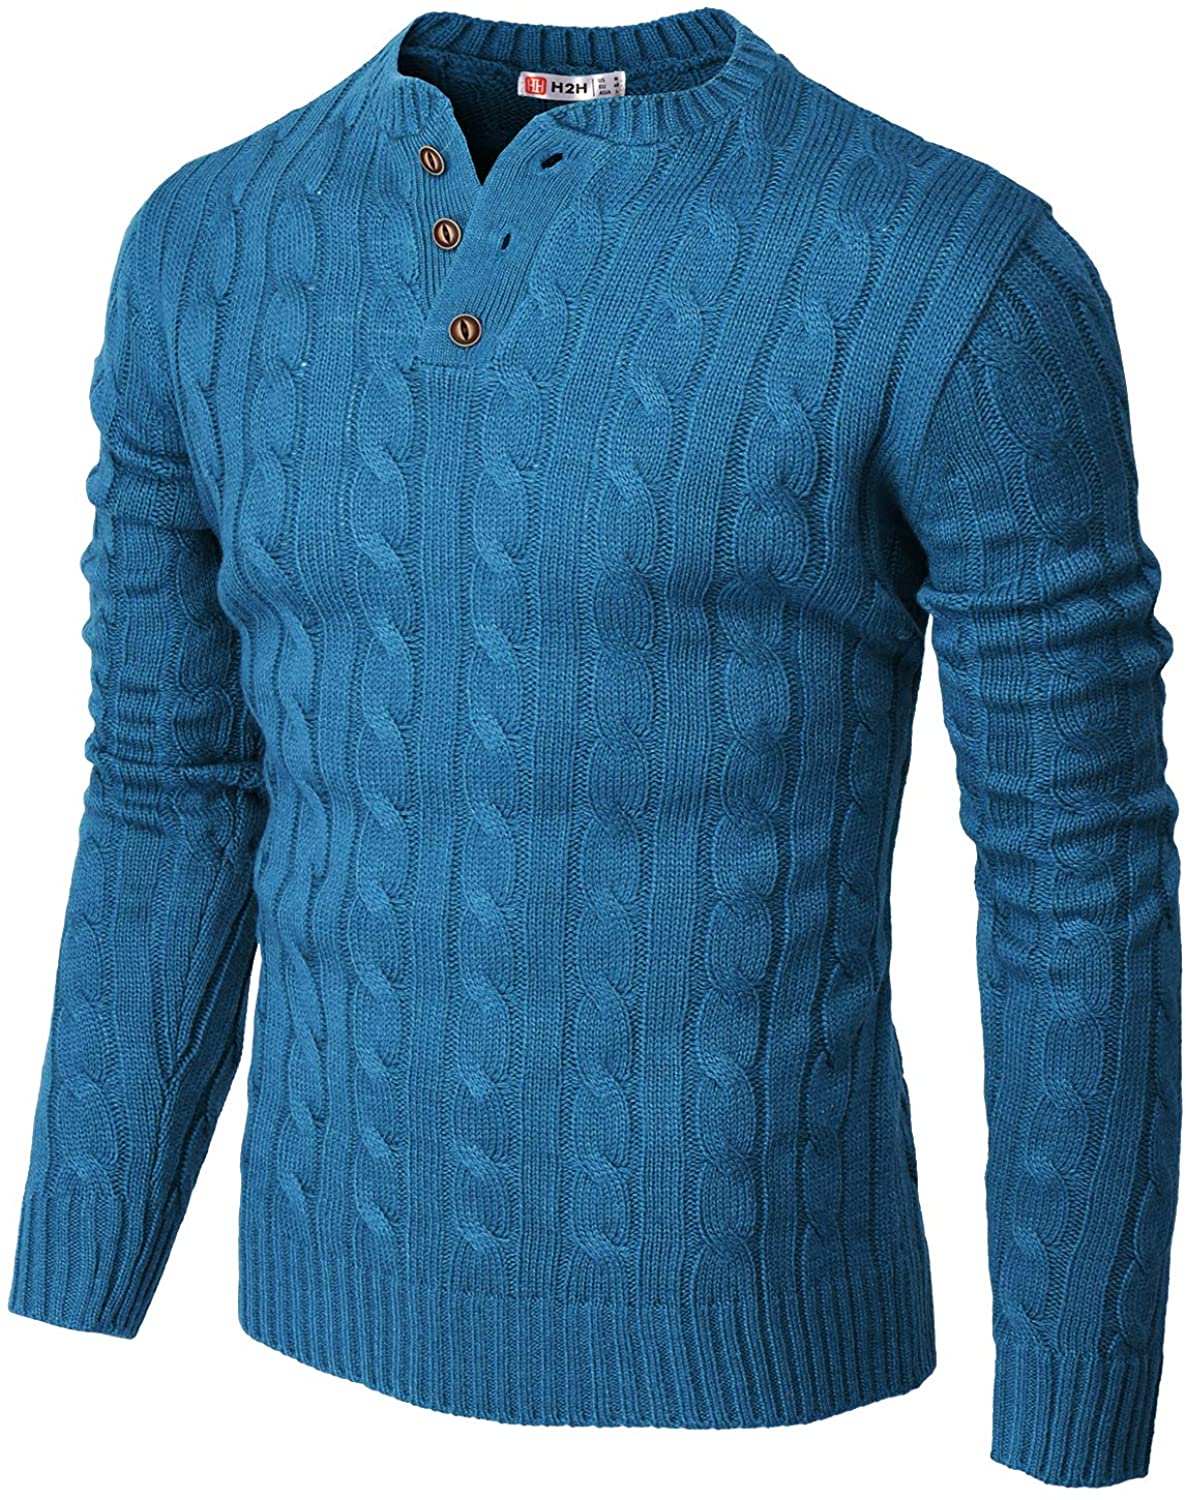 H2H Mens Casual Slim Fit Pullover Sweaters Long Sleeve Cable Knitted ...